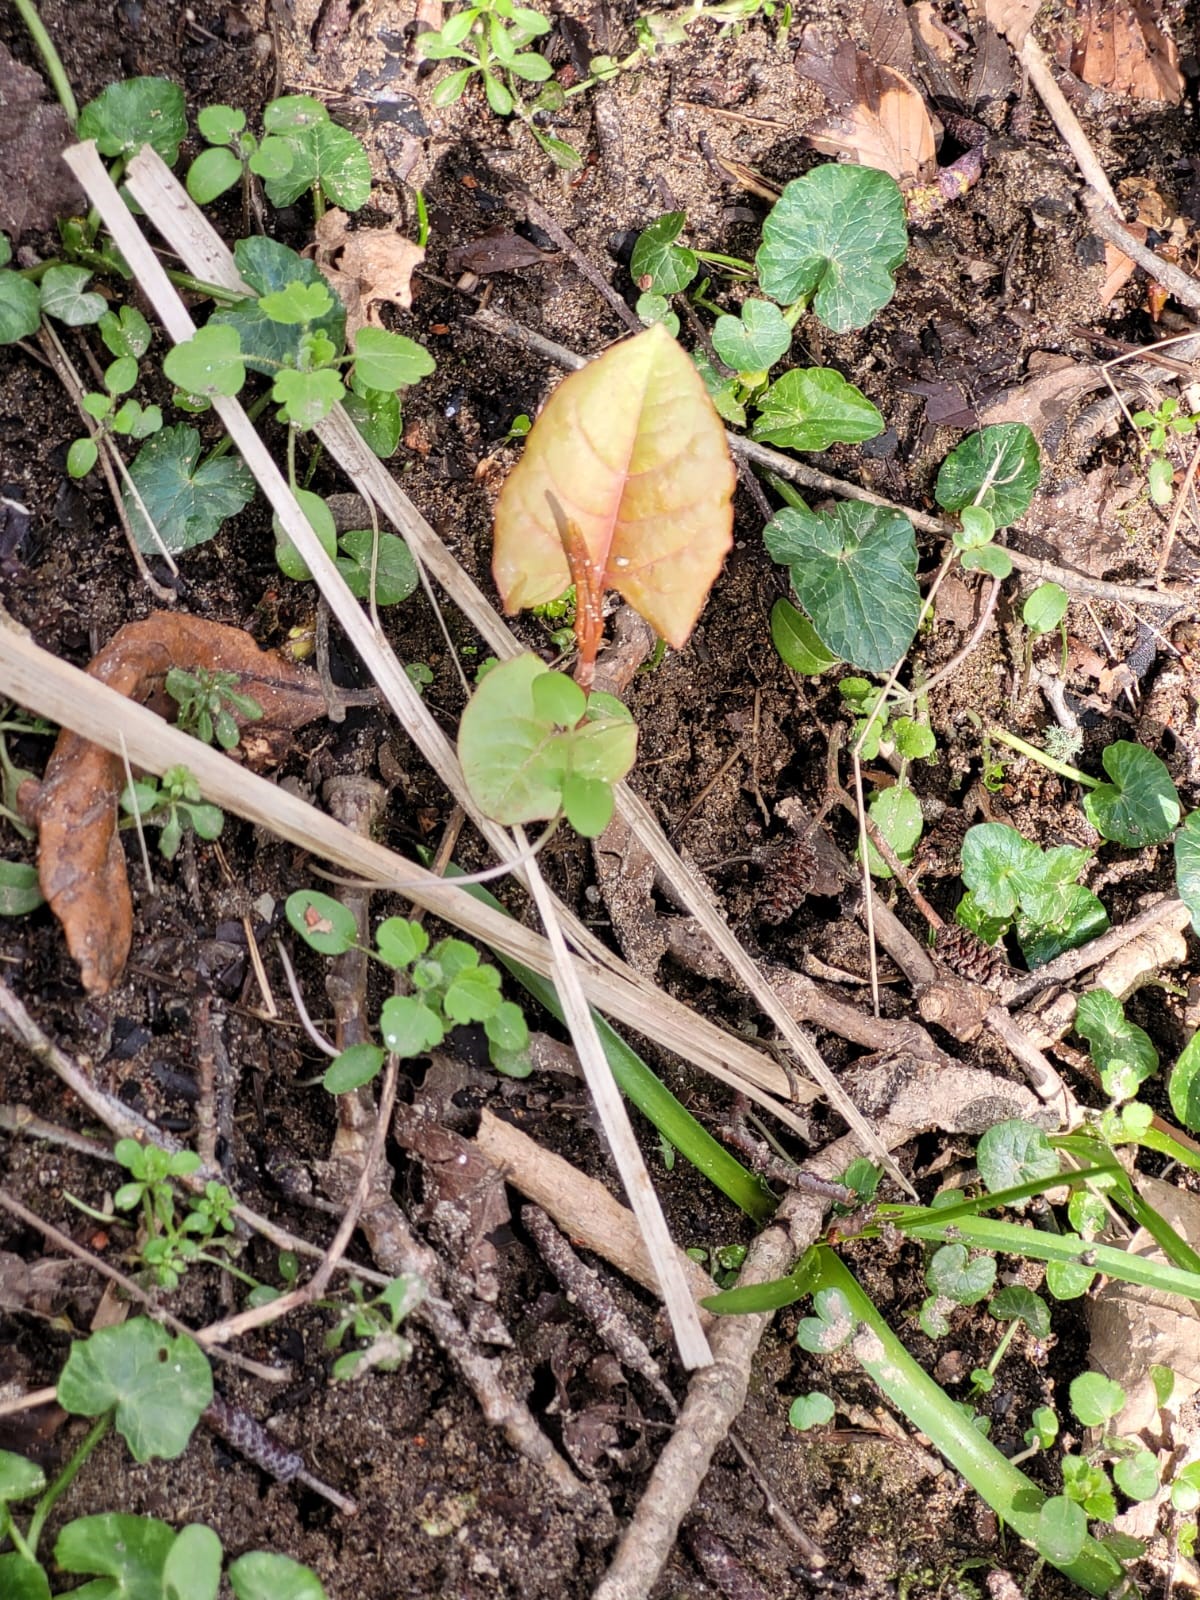 First Japanese knotweed shoots of 2022 spotted in Plymouth